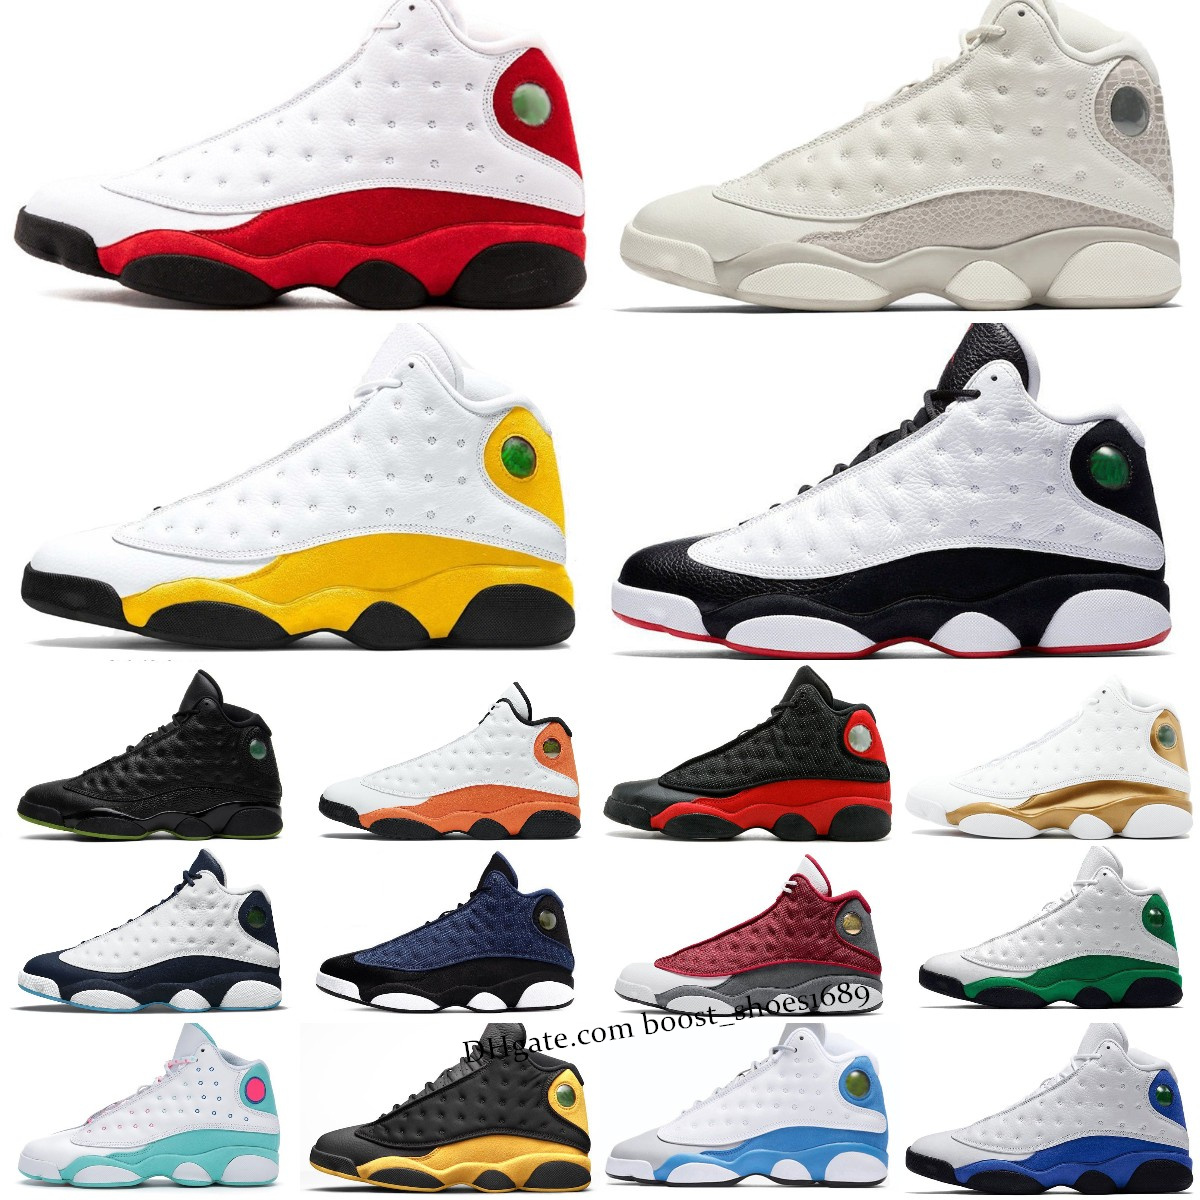 with box Jumpman 13 13S Basketball Shoes Mens High Flint Bred Island Green Red Dirty Hyper Royal Starfish Dirty Bred Got Game Black Cat Court Purple Trainer Sneakers